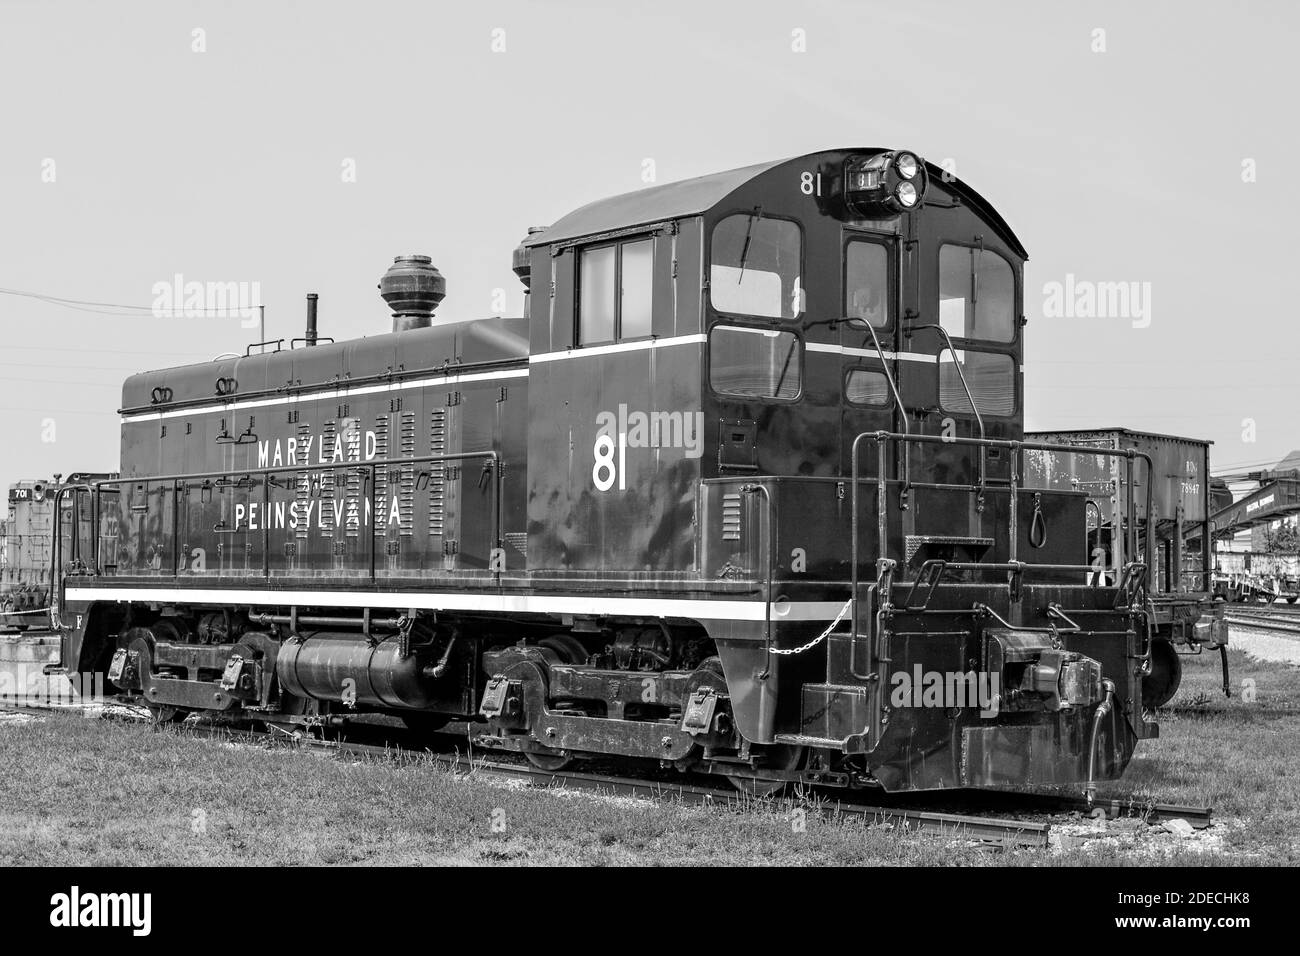 Antique locomotive of the Baltimore & Ohio Railroad No. 81 from 1913. Standing outside at the Pennsylvania Railroad Museum in Strasburg Stock Photo